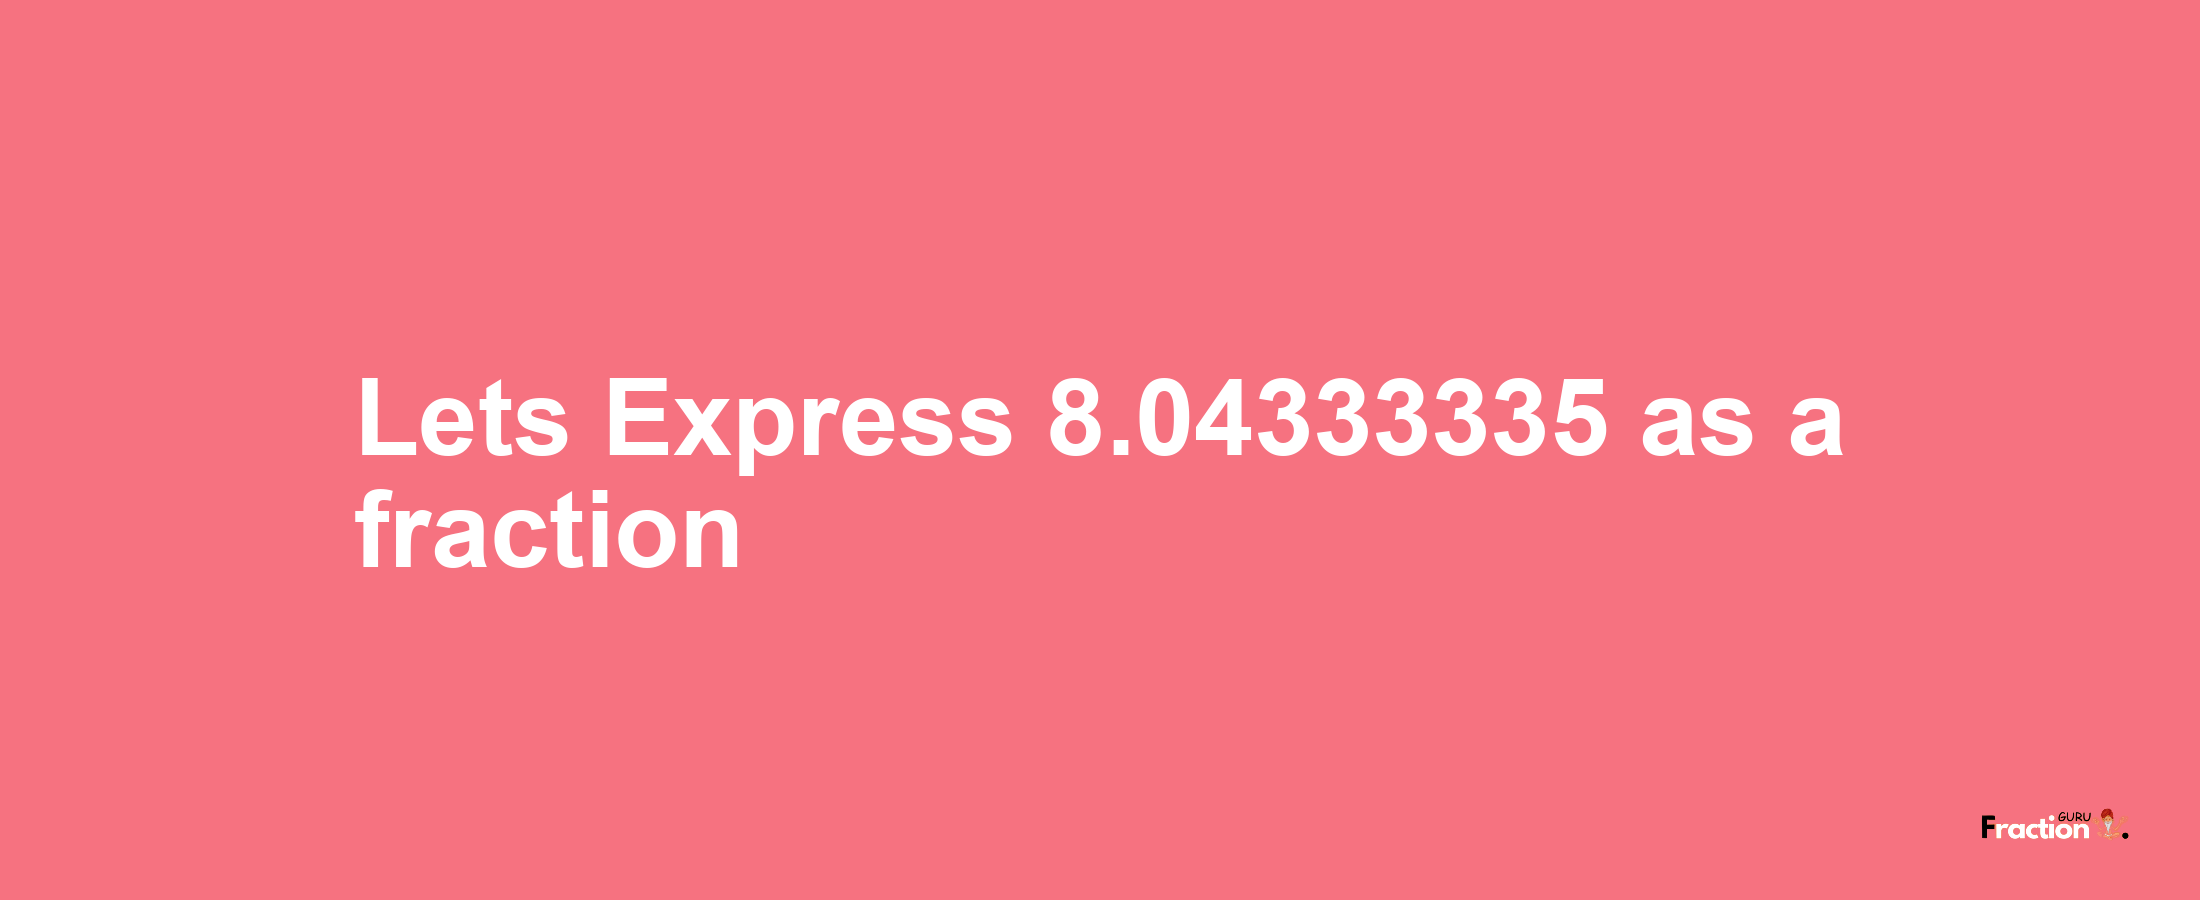 Lets Express 8.04333335 as afraction